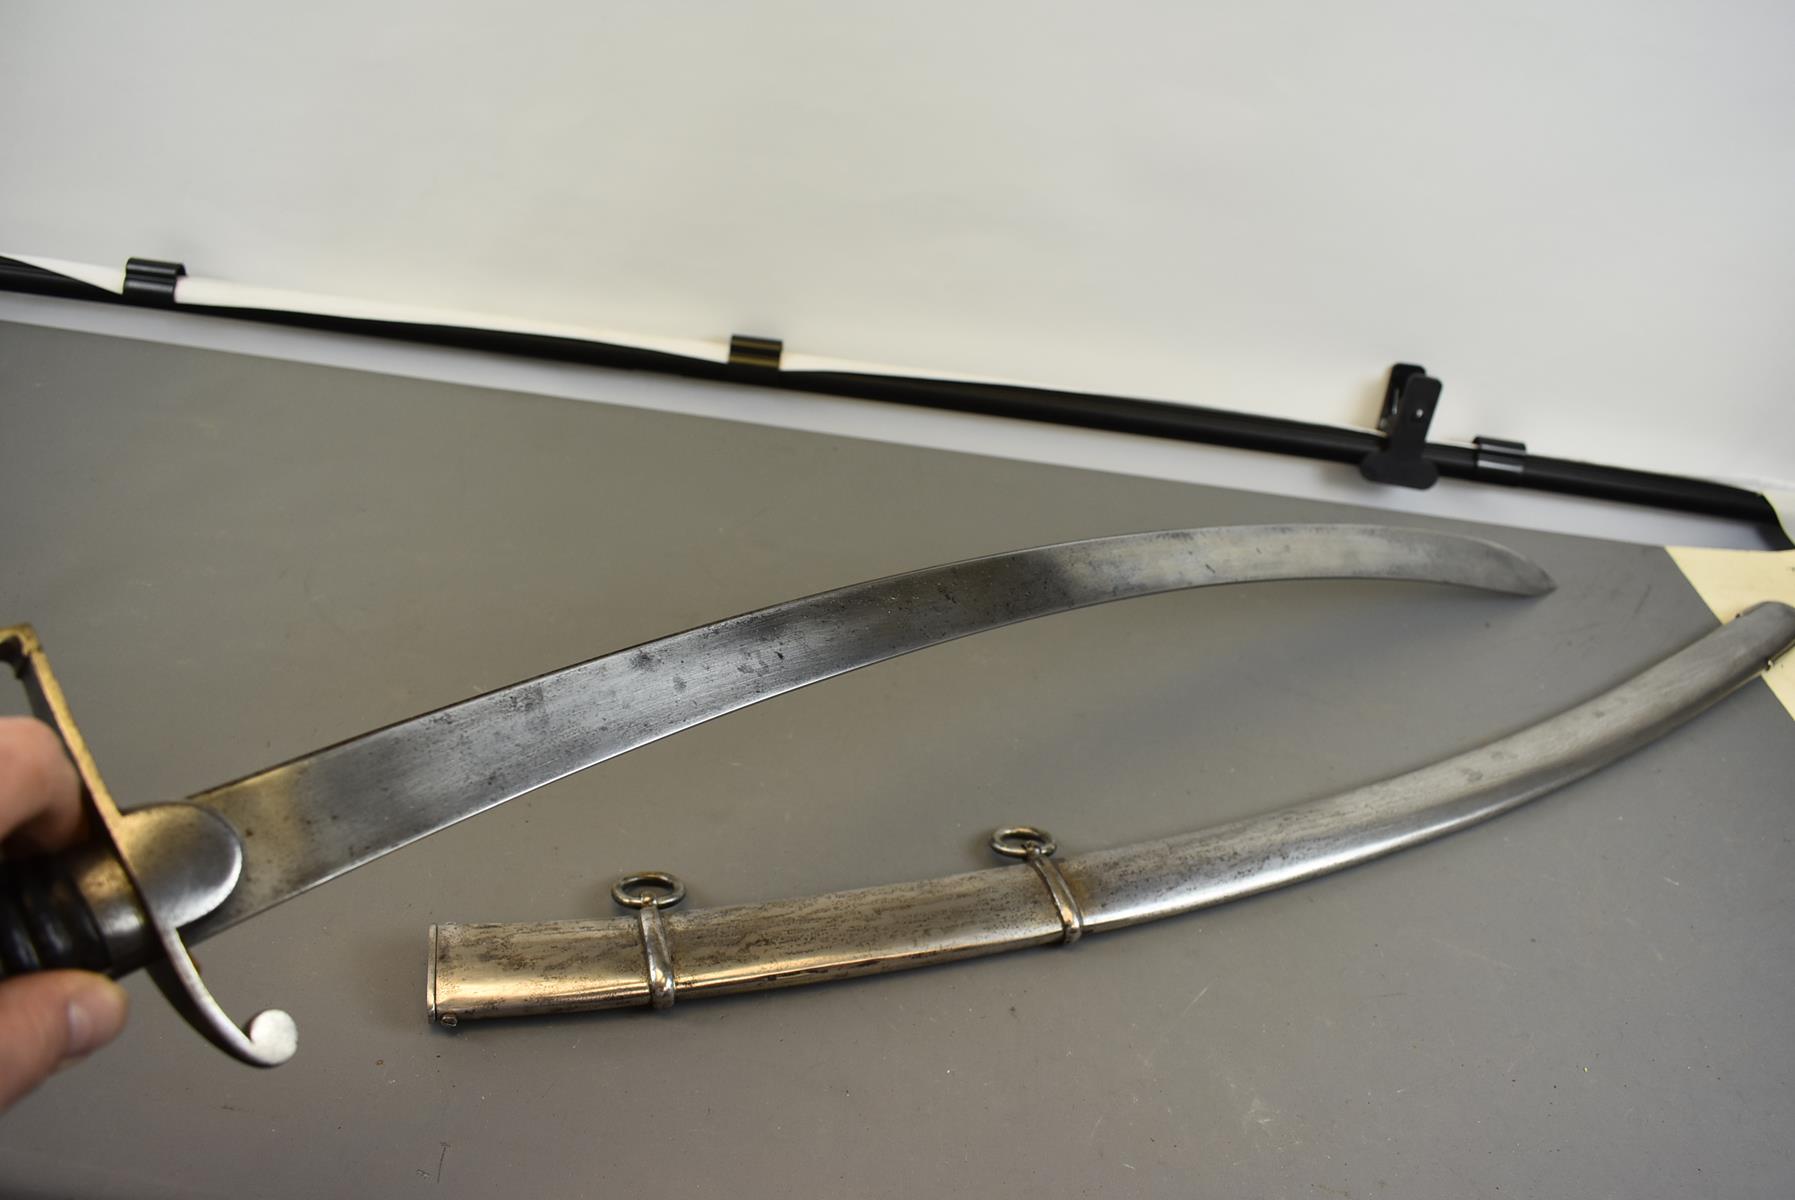 A SCARCE 15TH OR KING'S HUSSARS 1796 PATTERN LIGHT CAVALRY OFFICER'S SABRE OR SWORD, 89cm curved - Image 6 of 10